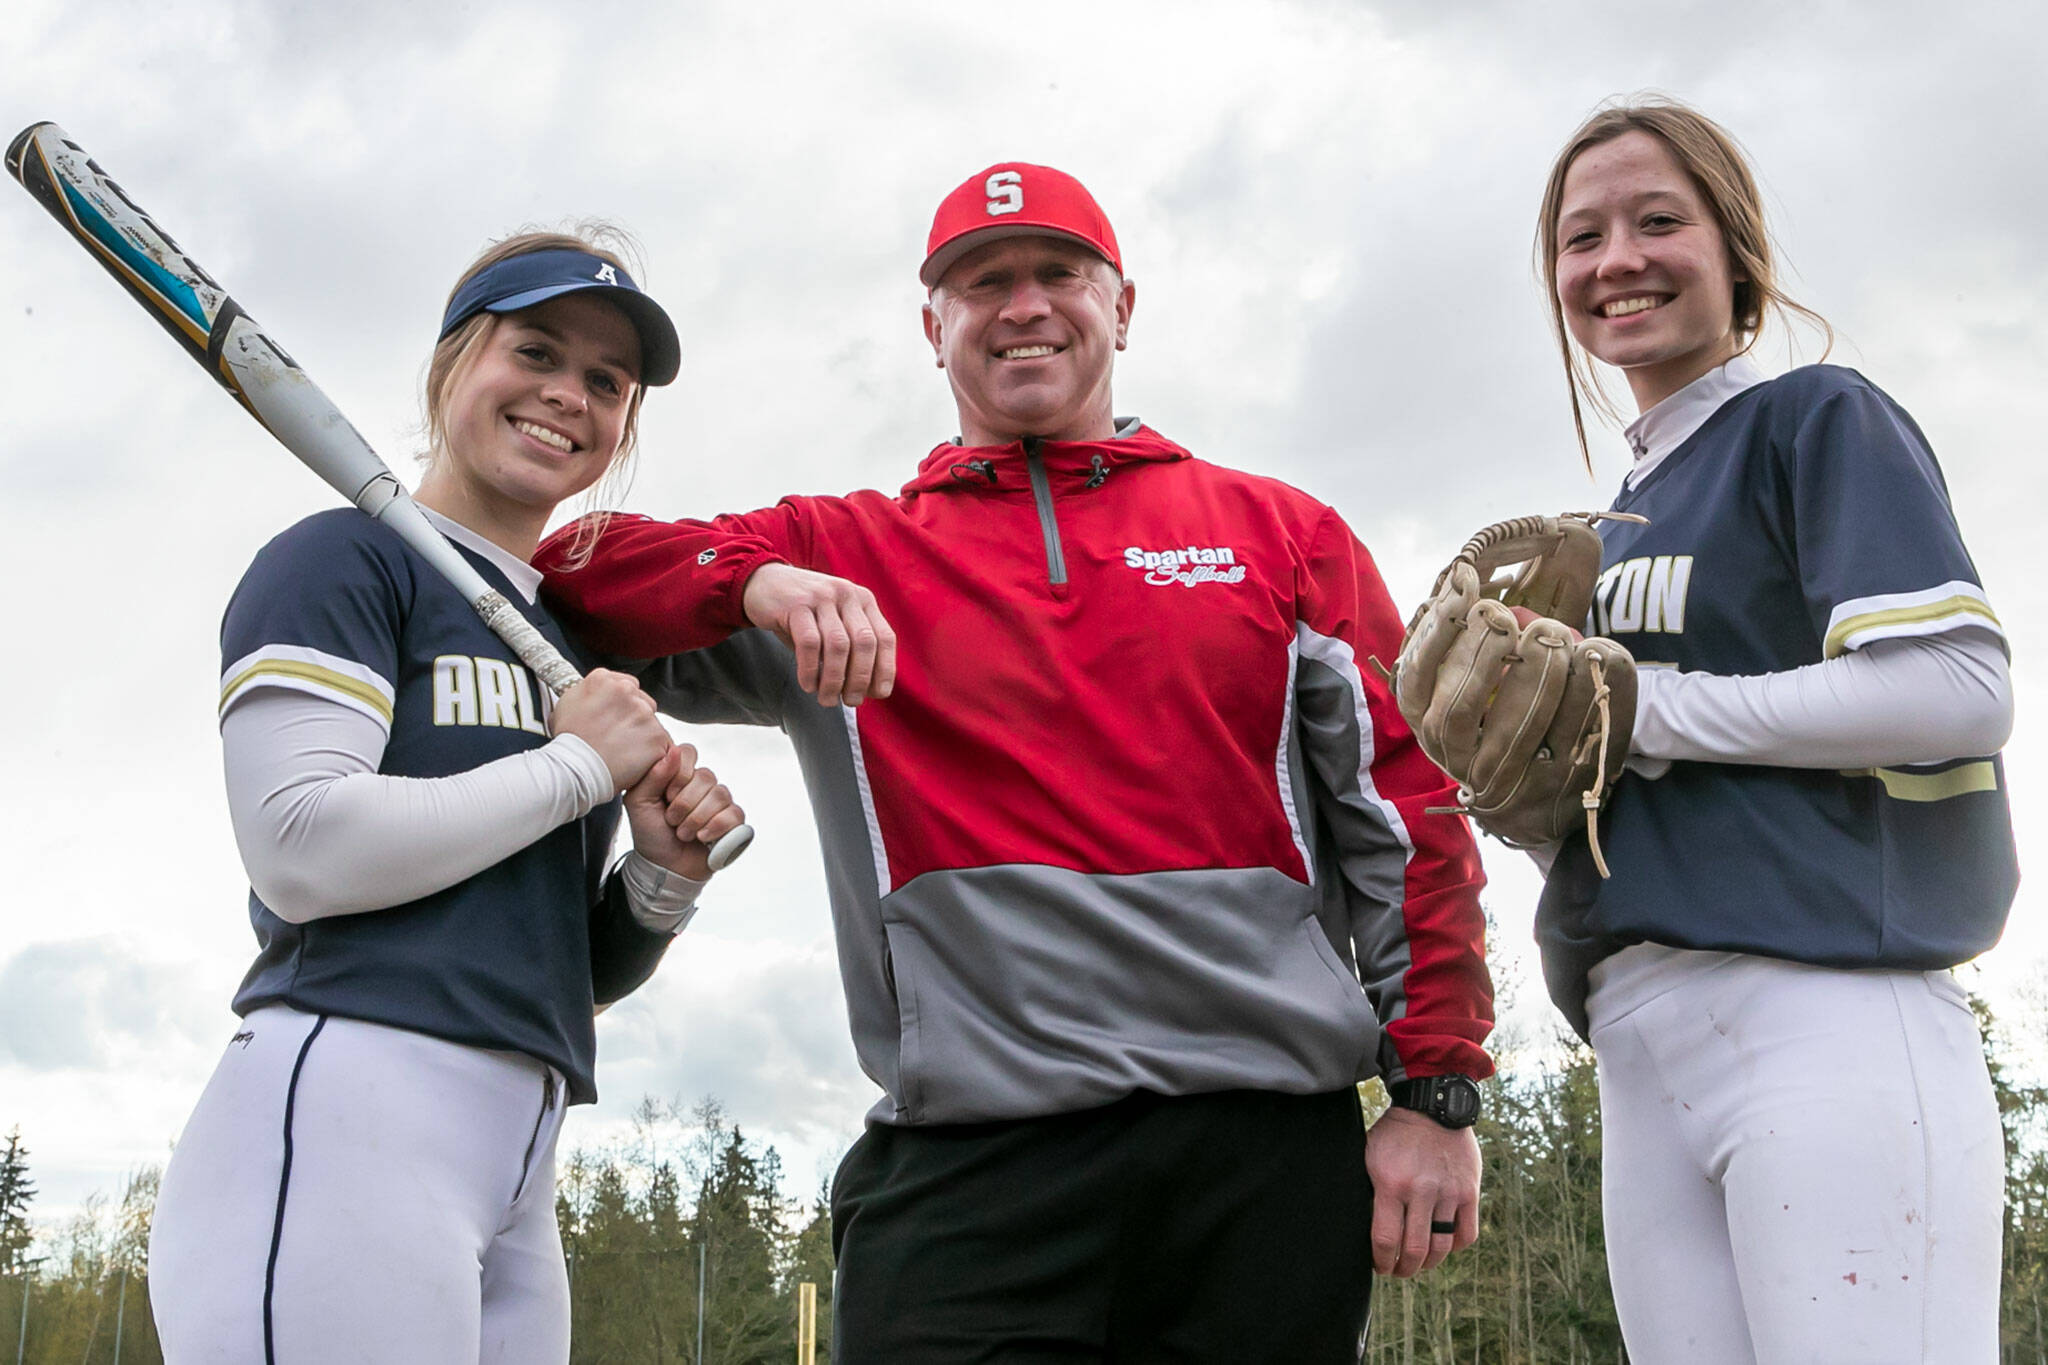 Arlington’s Riley Ryan (left) and Reagan Ryan (right) with their father, Stanwood head softball coach Patrick Ryan. (Kevin Clark / The Herald)